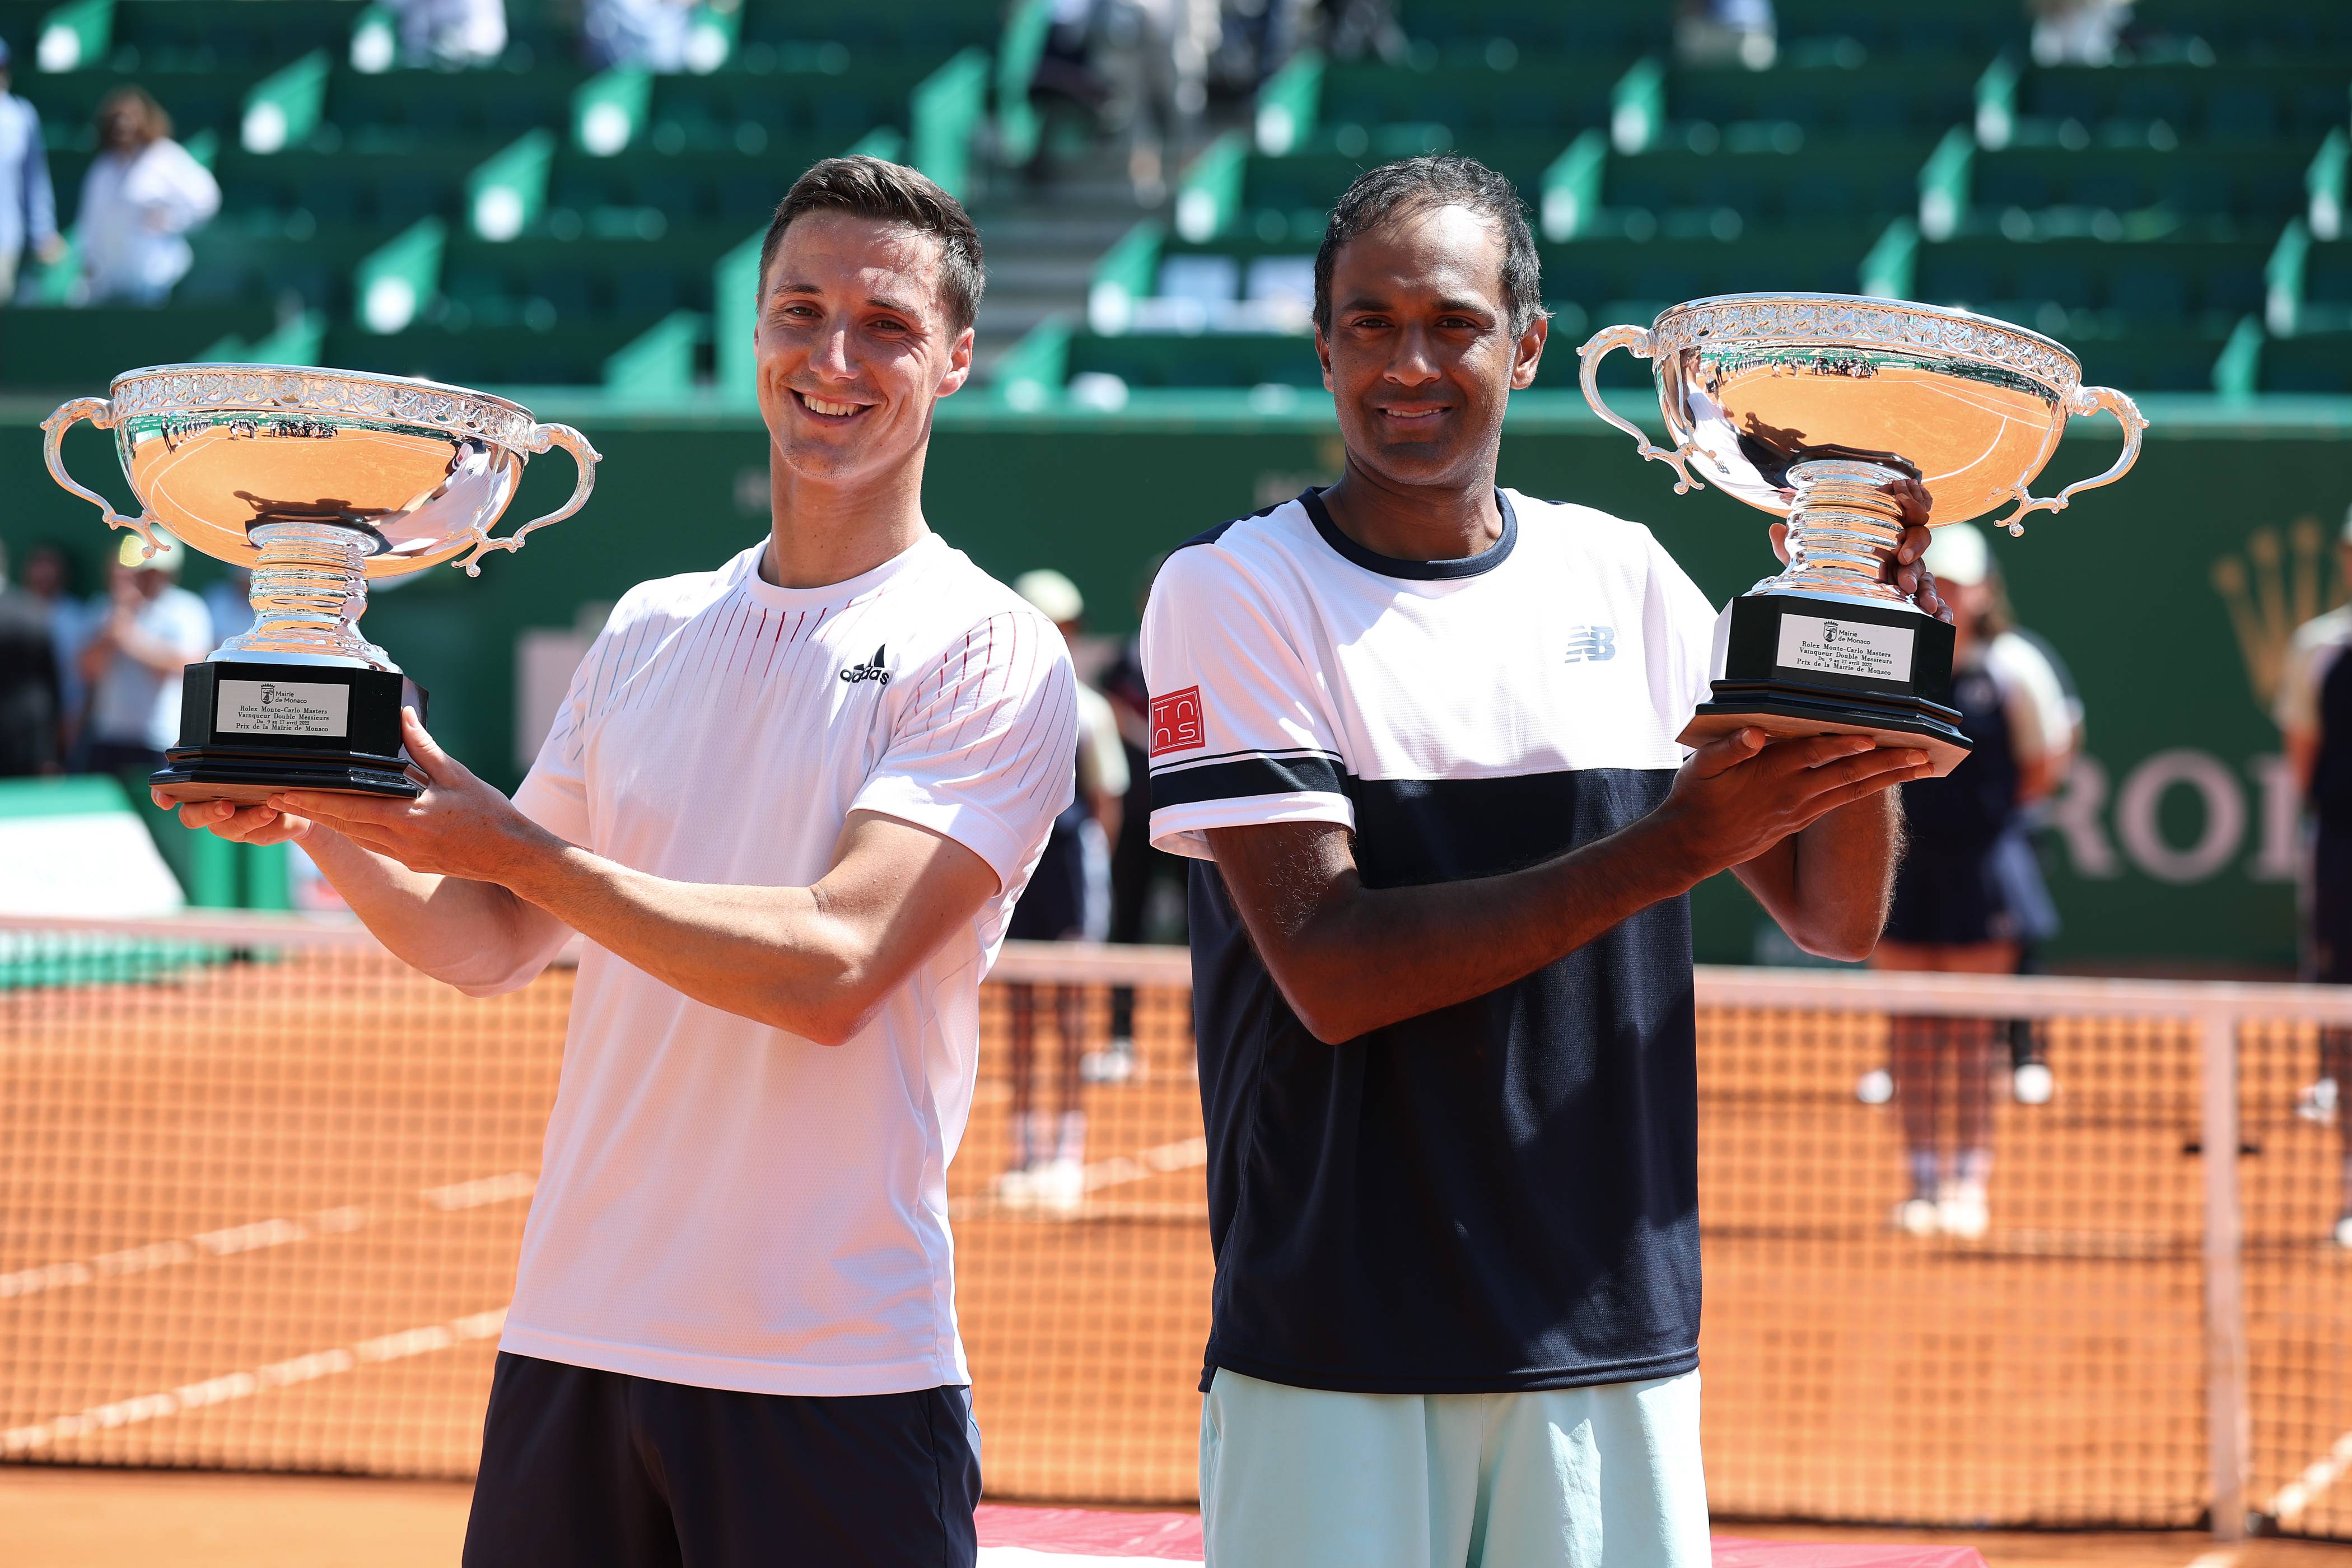 Monte-Carlo Masters 2022 Daily updates and results